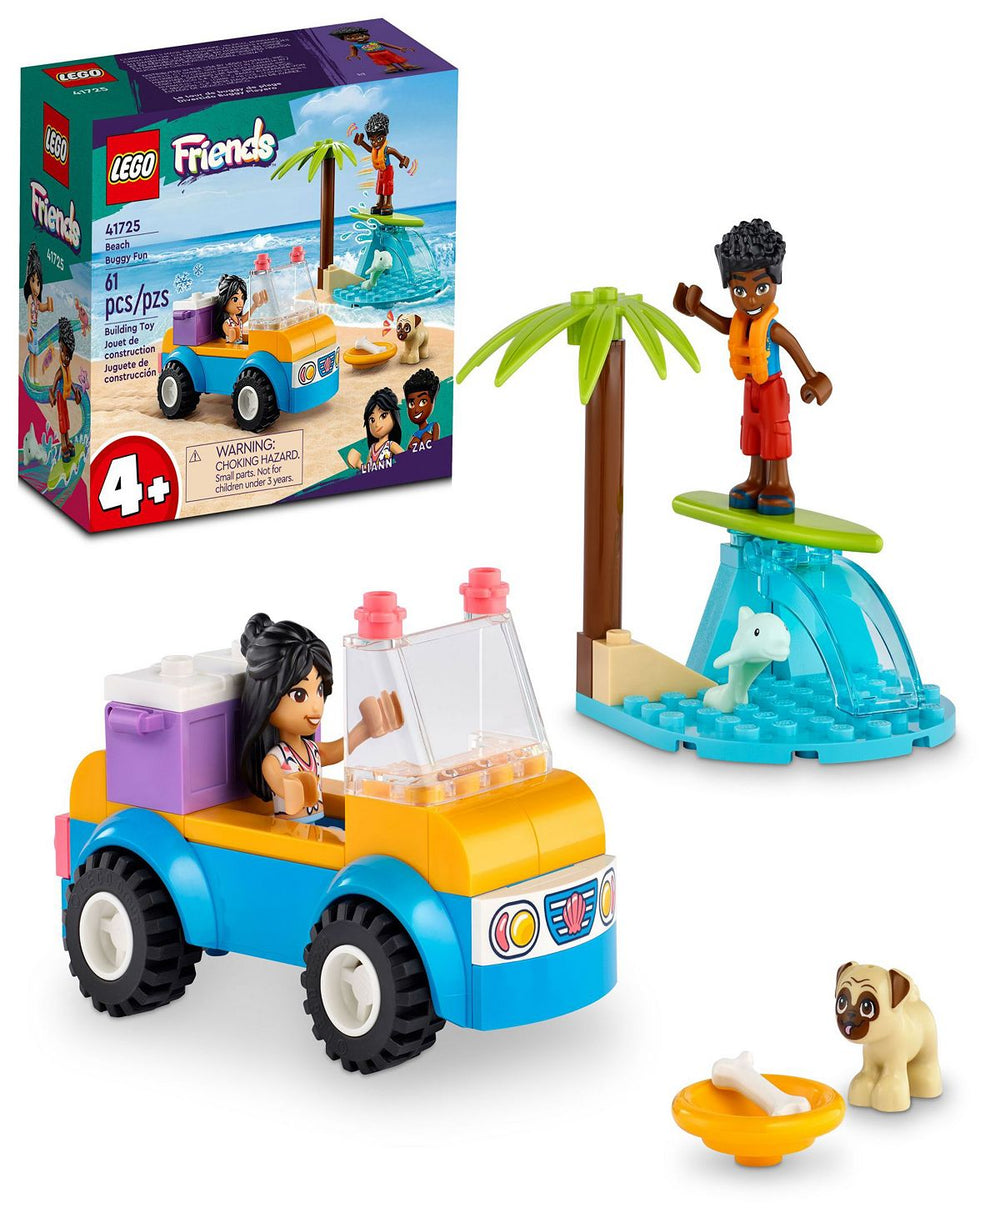 LEGO Friends 41725 Beach Buggy and Surf Adventure Building Set, 61 Pieces